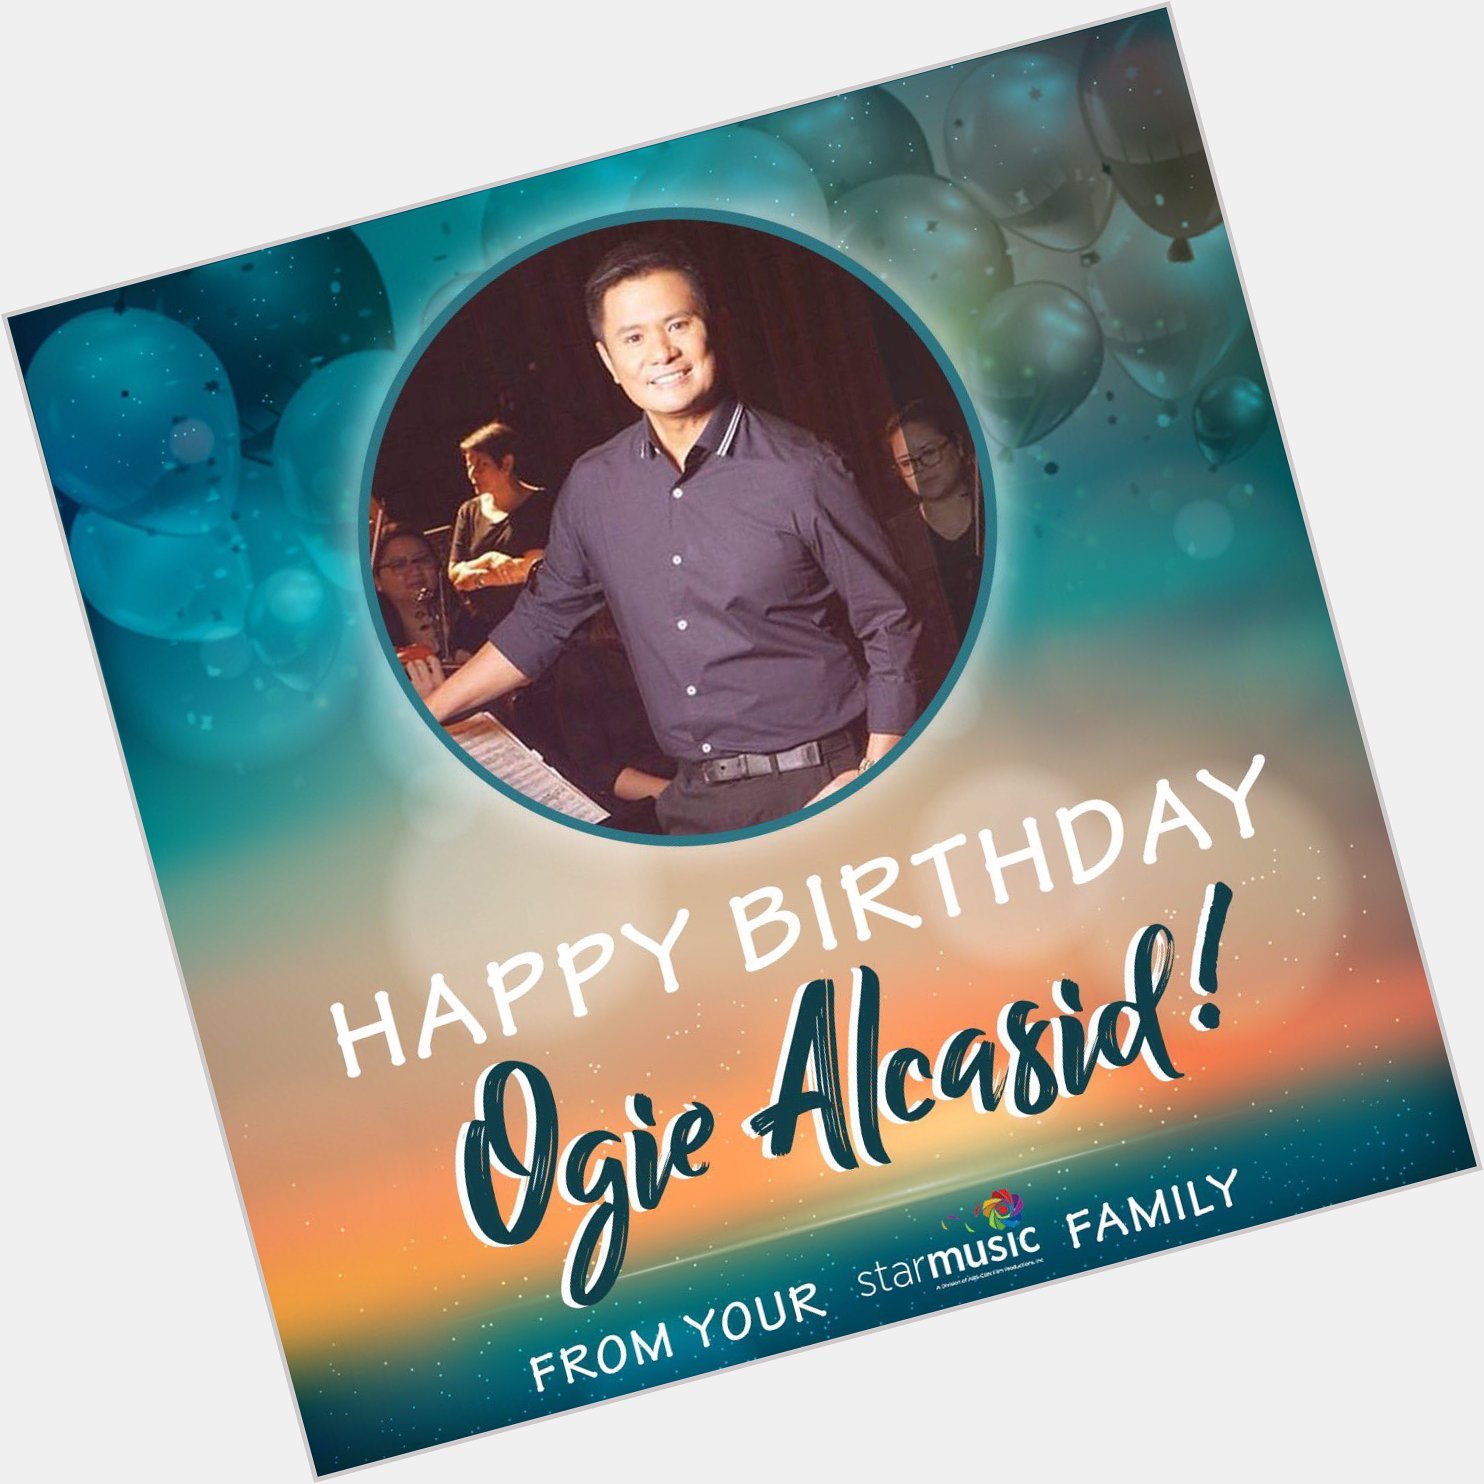 Happy Birthday Mr. Ogie Alcasid! From your Star Music family!    